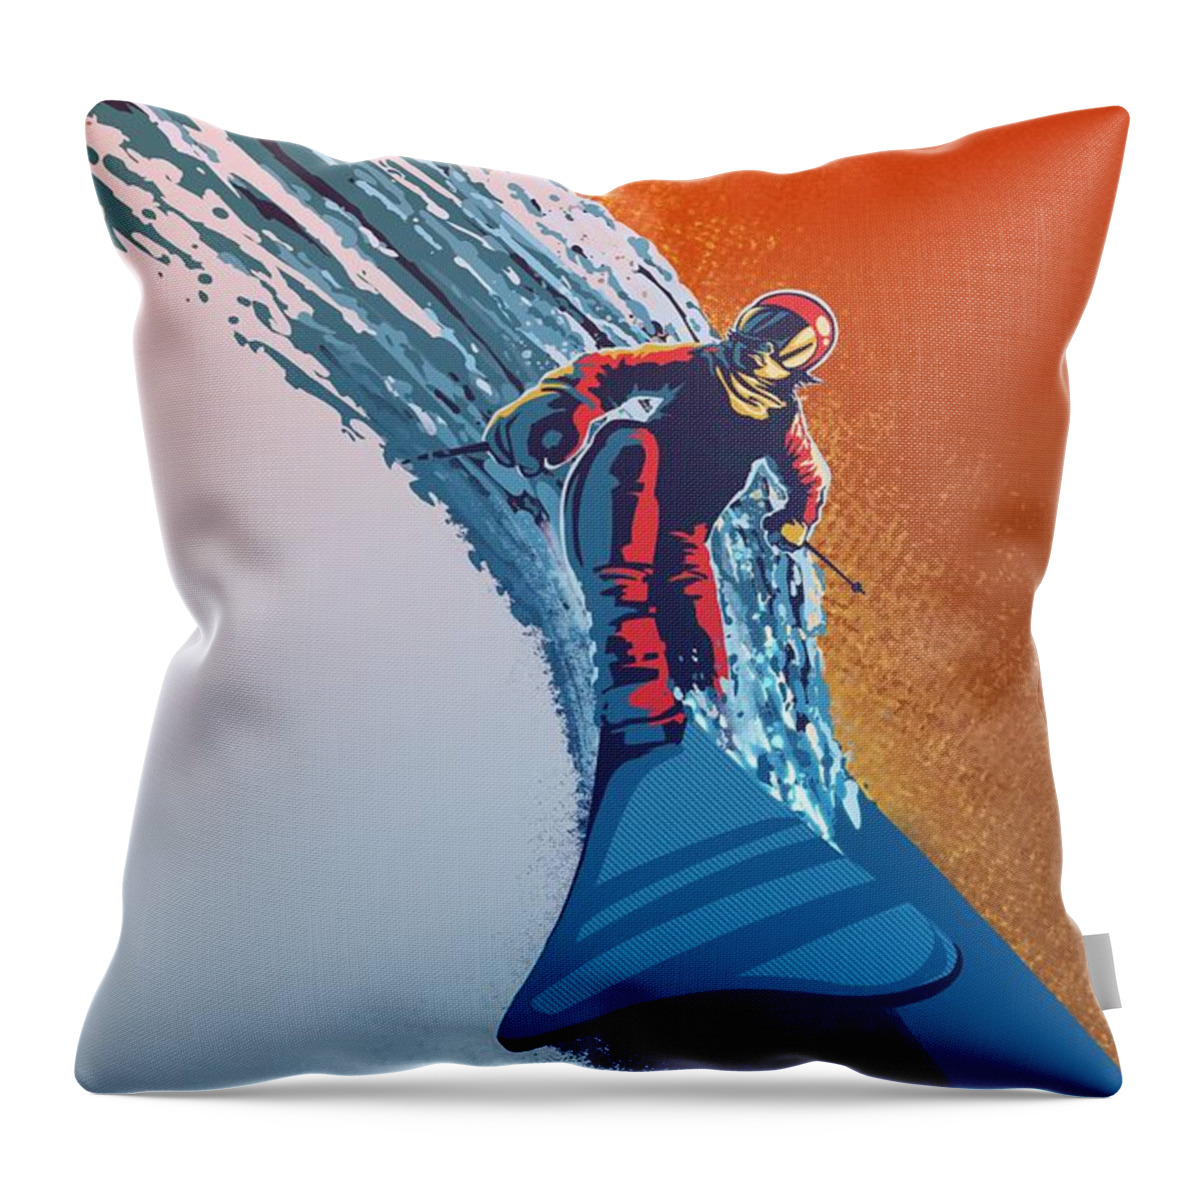 Ski Art Throw Pillow featuring the painting Addicted to Powder by Sassan Filsoof